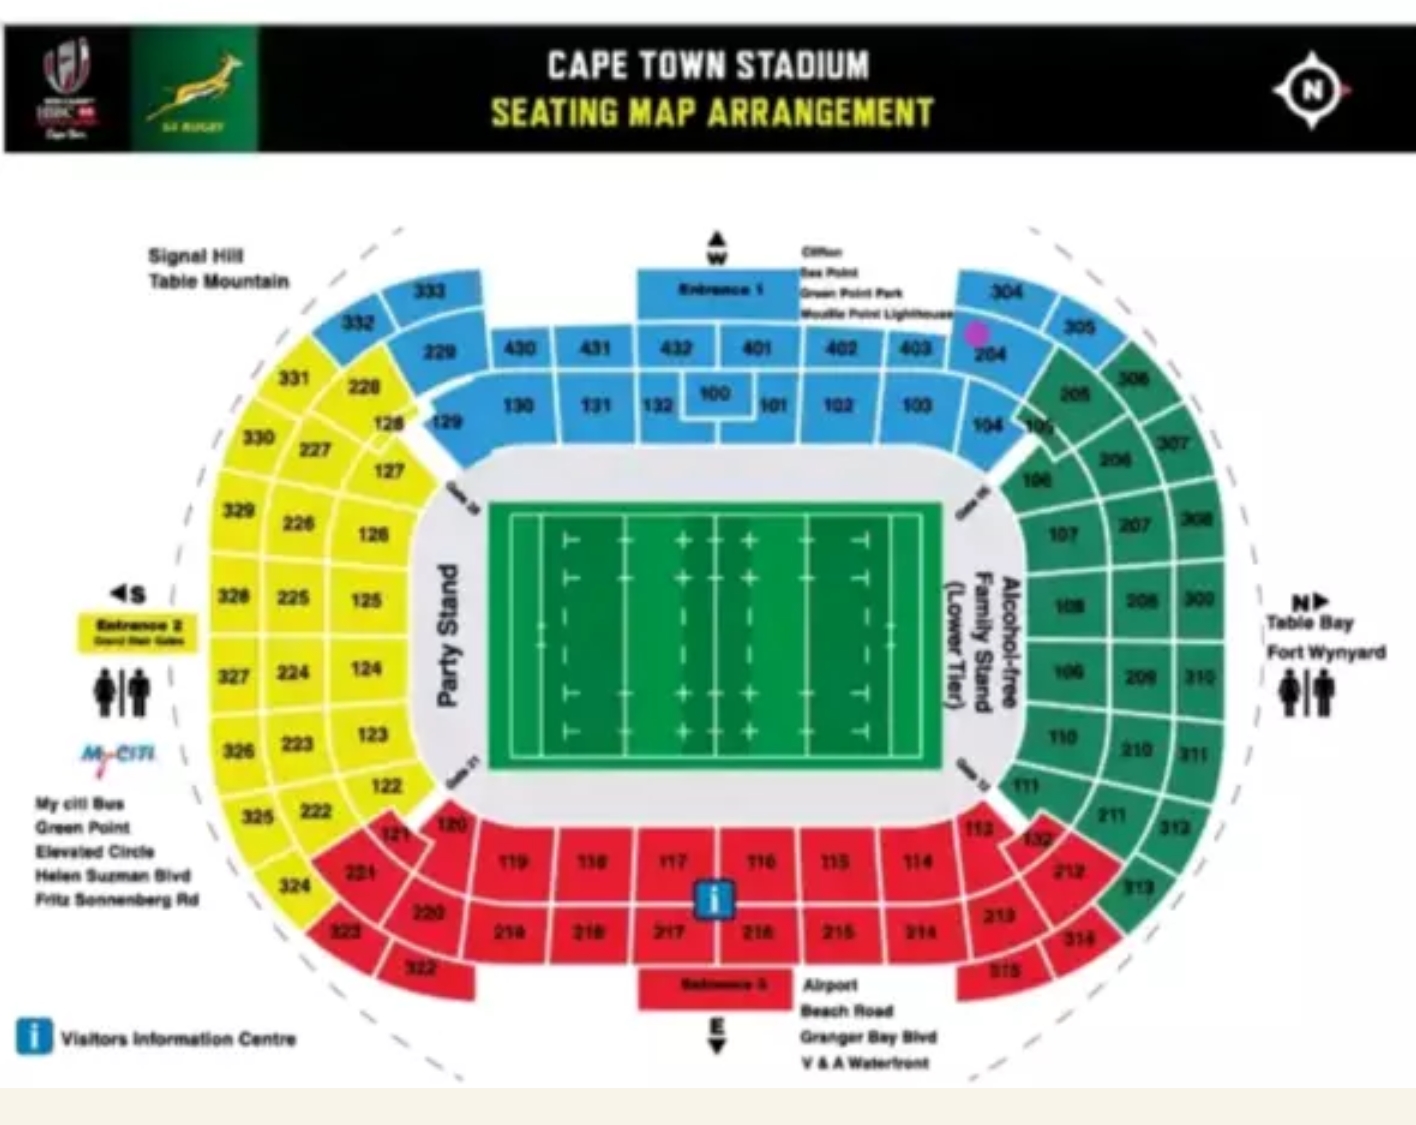 HSBC SEVENS rugby tickets in Cape Town on 15 December 2019